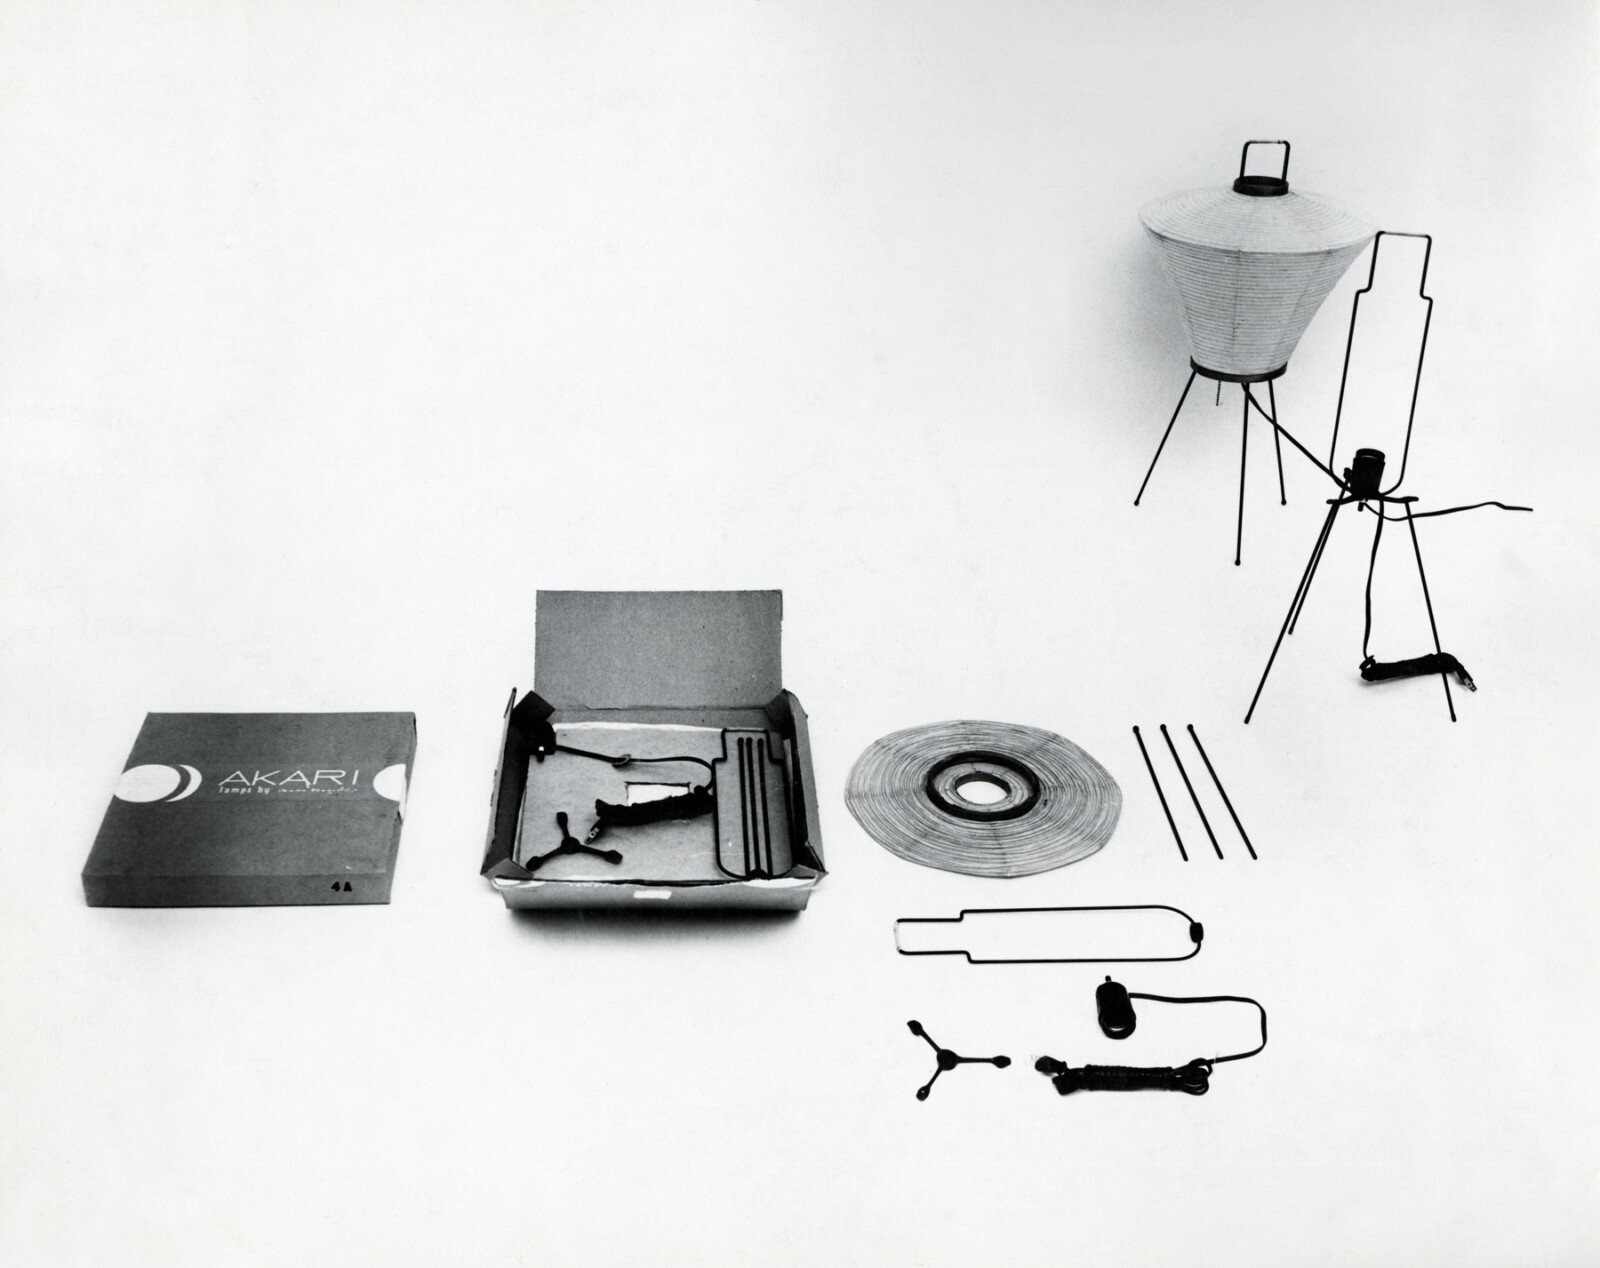  Akari 5A (designed 1952) with its box and elements. Source:  Noguchi Museum  